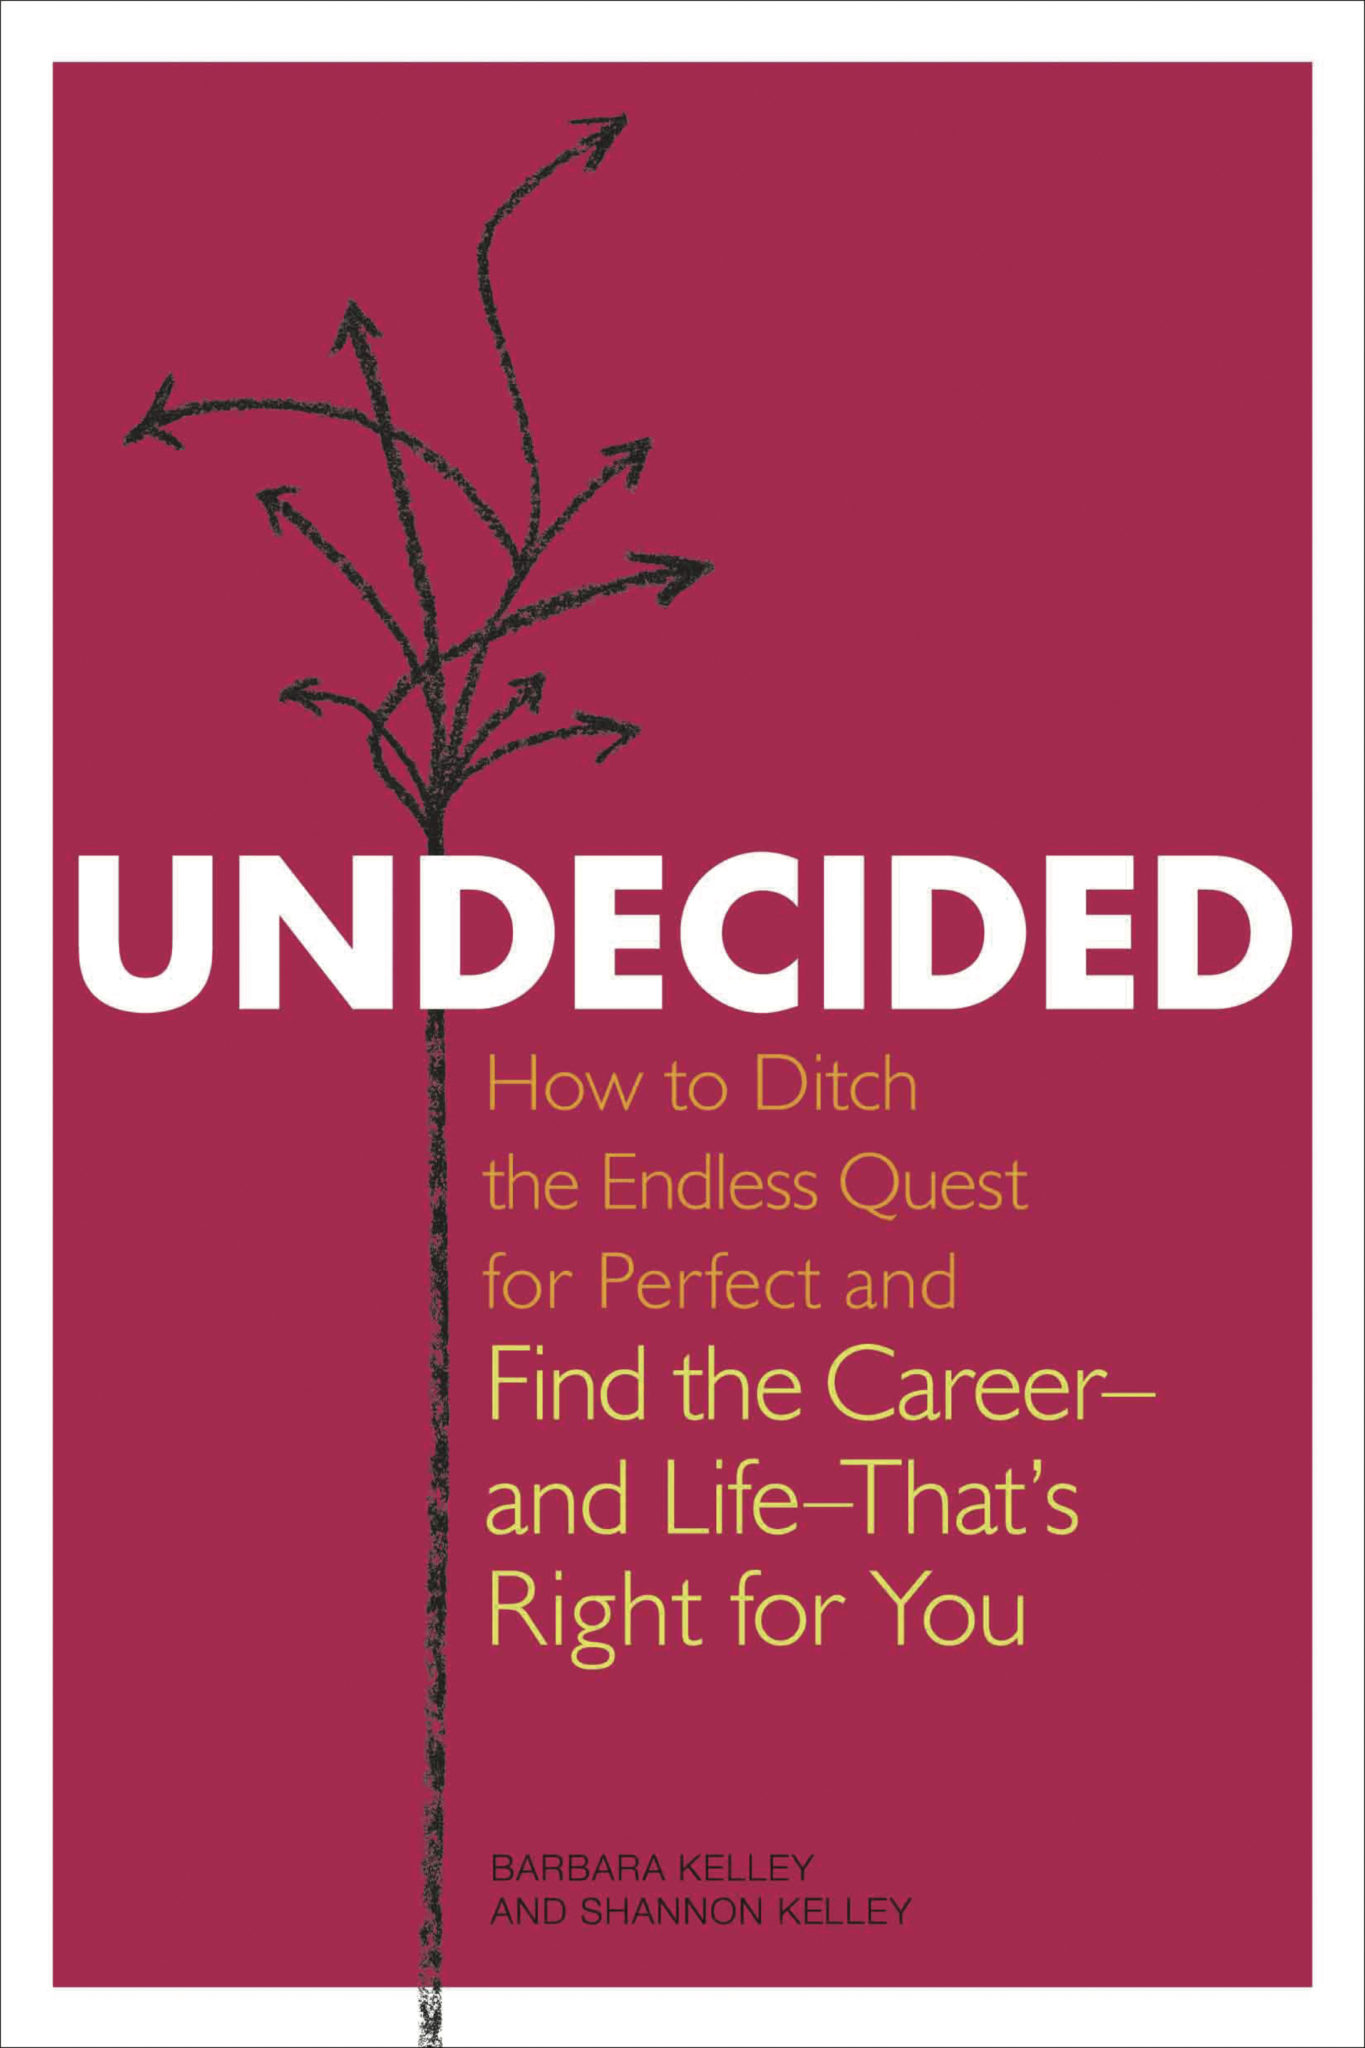 Undecided book cover